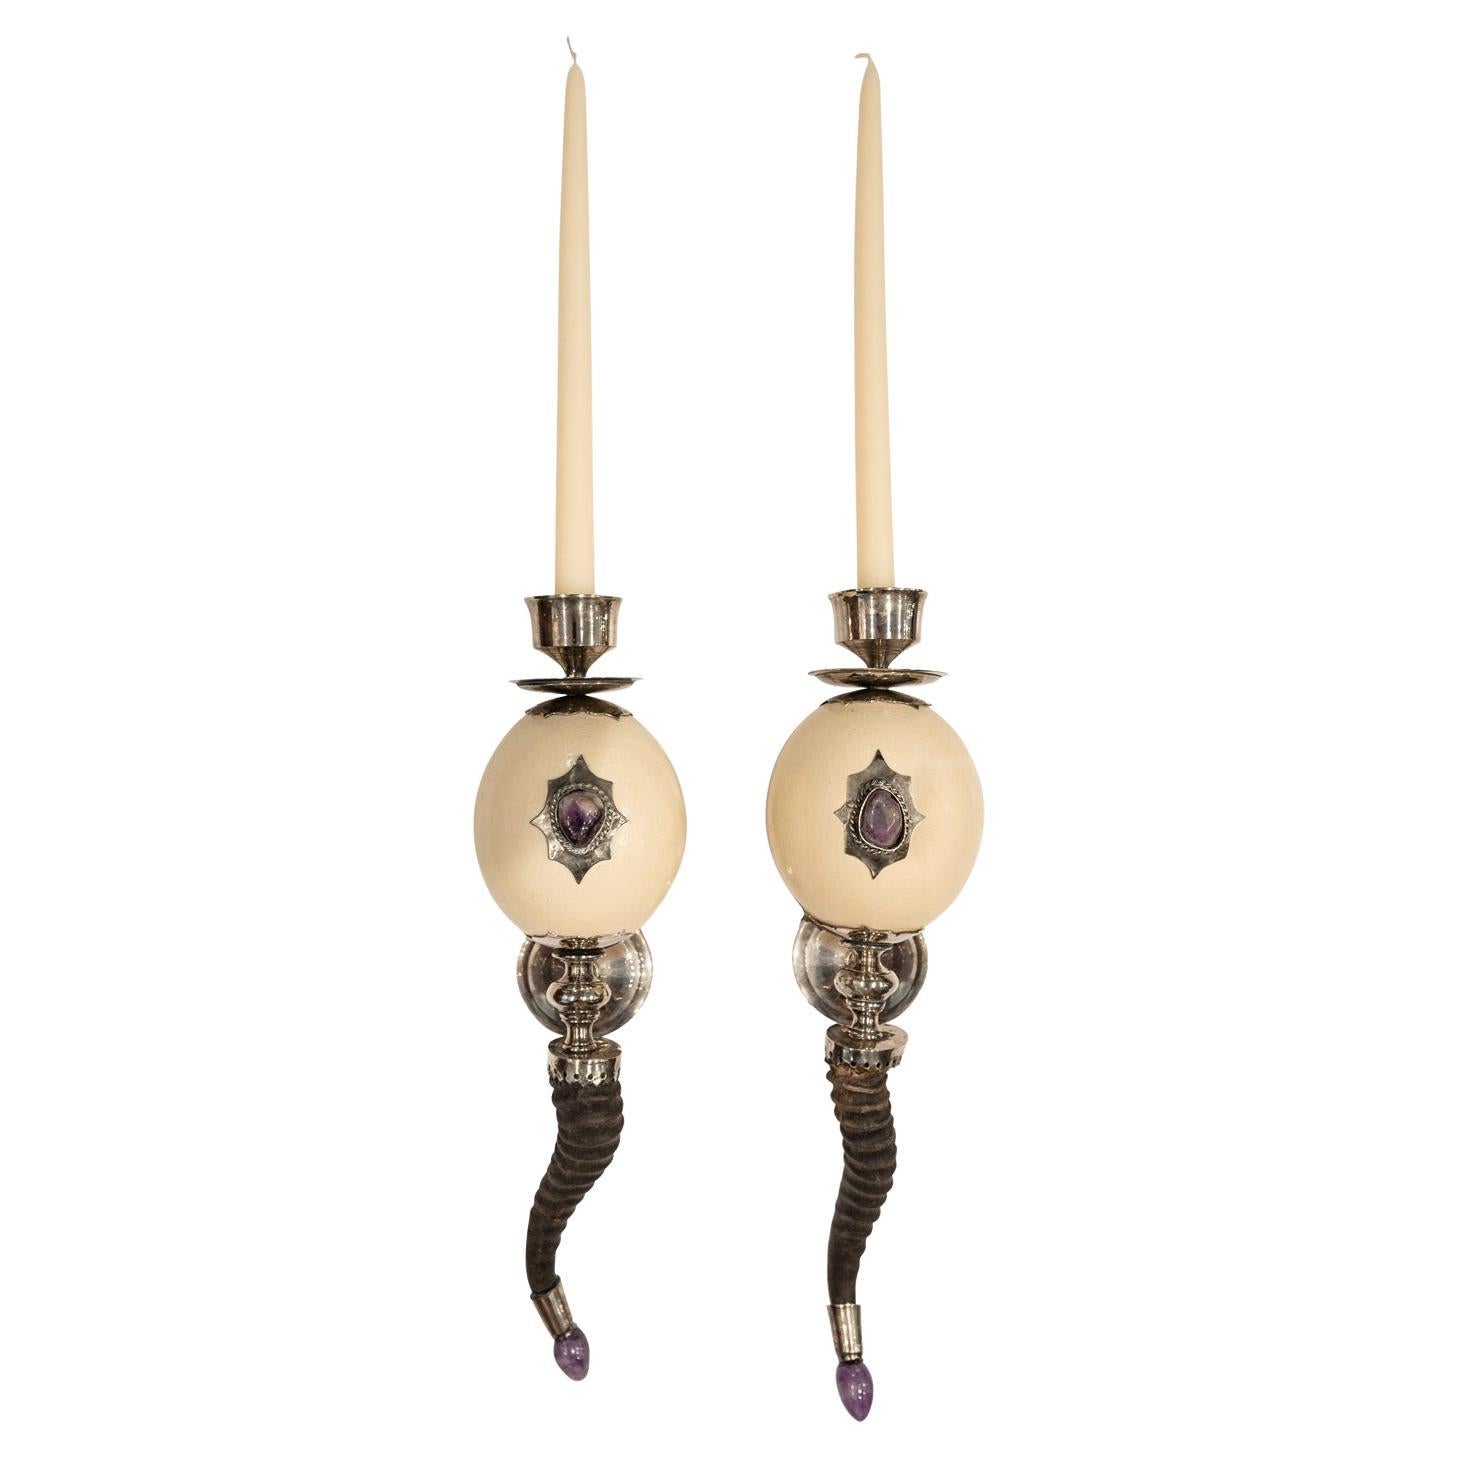 J. Anthony Redmile Pair of Rare Ostrich Egg Wall Sconces 1970s 'Signed' For Sale